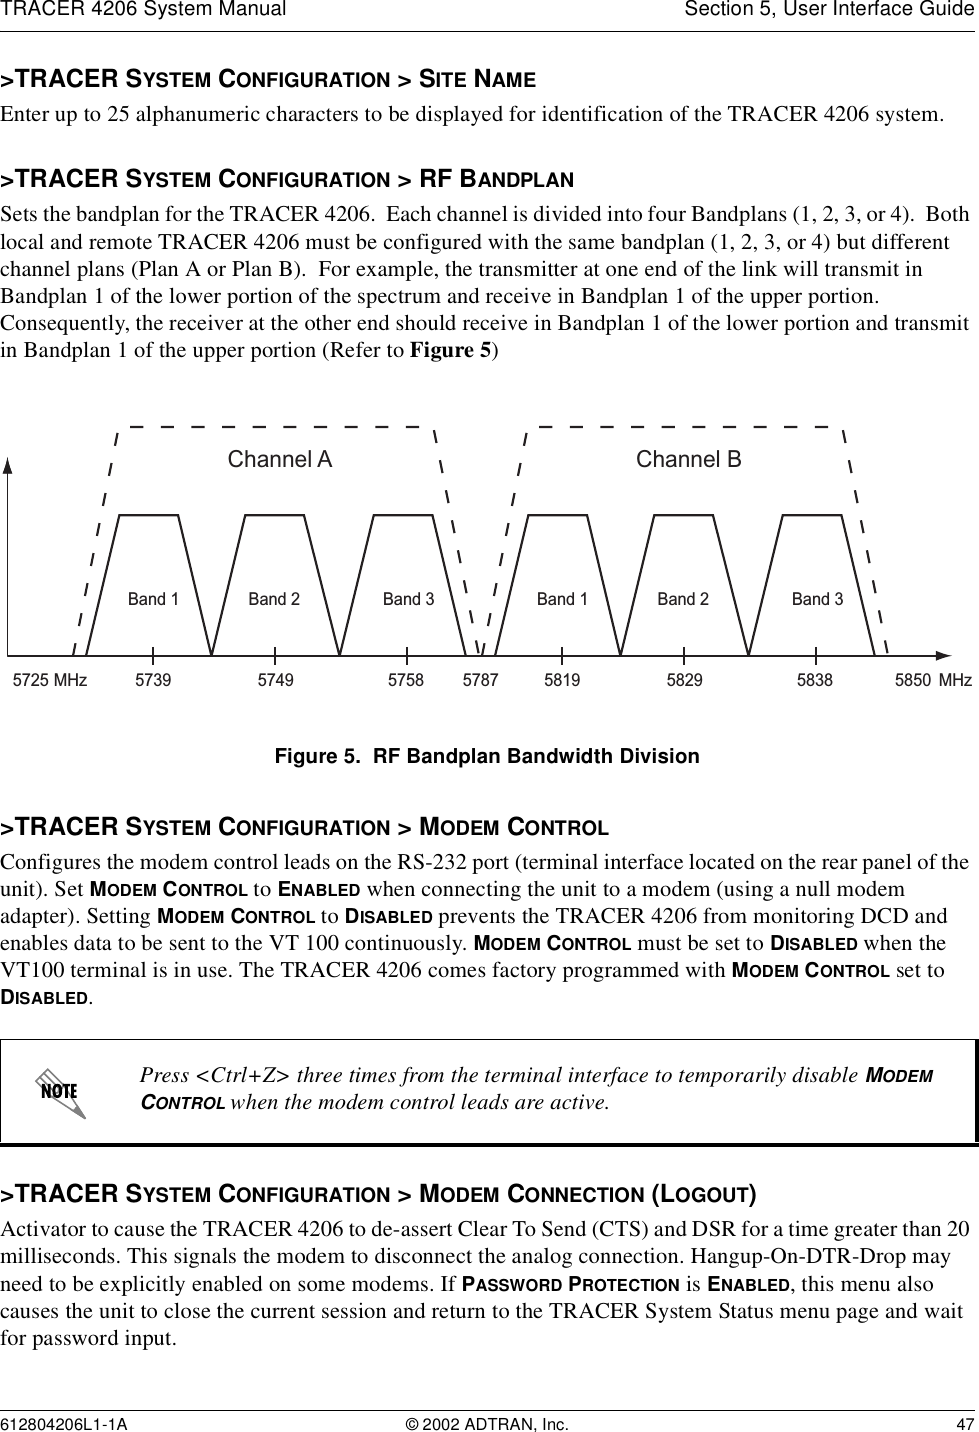 TRACER 4206 System Manual Section 5, User Interface Guide612804206L1-1A © 2002 ADTRAN, Inc. 47&gt;TRACER SYSTEM CONFIGURATION &gt; SITE NAMEEnter up to 25 alphanumeric characters to be displayed for identification of the TRACER 4206 system.&gt;TRACER SYSTEM CONFIGURATION &gt; RF BANDPLANSets the bandplan for the TRACER 4206.  Each channel is divided into four Bandplans (1, 2, 3, or 4).  Both local and remote TRACER 4206 must be configured with the same bandplan (1, 2, 3, or 4) but different channel plans (Plan A or Plan B).  For example, the transmitter at one end of the link will transmit in Bandplan 1 of the lower portion of the spectrum and receive in Bandplan 1 of the upper portion.  Consequently, the receiver at the other end should receive in Bandplan 1 of the lower portion and transmit in Bandplan 1 of the upper portion (Refer to Figure 5)Figure 5.  RF Bandplan Bandwidth Division&gt;TRACER SYSTEM CONFIGURATION &gt; MODEM CONTROLConfigures the modem control leads on the RS-232 port (terminal interface located on the rear panel of the unit). Set MODEM CONTROL to ENABLED when connecting the unit to a modem (using a null modem adapter). Setting MODEM CONTROL to DISABLED prevents the TRACER 4206 from monitoring DCD and enables data to be sent to the VT 100 continuously. MODEM CONTROL must be set to DISABLED when the VT100 terminal is in use. The TRACER 4206 comes factory programmed with MODEM CONTROL set to DISABLED.&gt;TRACER SYSTEM CONFIGURATION &gt; MODEM CONNECTION (LOGOUT)Activator to cause the TRACER 4206 to de-assert Clear To Send (CTS) and DSR for a time greater than 20 milliseconds. This signals the modem to disconnect the analog connection. Hangup-On-DTR-Drop may need to be explicitly enabled on some modems. If PASSWORD PROTECTION is ENABLED, this menu also causes the unit to close the current session and return to the TRACER System Status menu page and wait for password input.Press &lt;Ctrl+Z&gt; three times from the terminal interface to temporarily disable MODEM CONTROL when the modem control leads are active.Channel A57395725 5787 58505749 5758MHz MHzBand 3Band 2Band 1Channel B5819 5829 5838Band 3Band 2Band 1